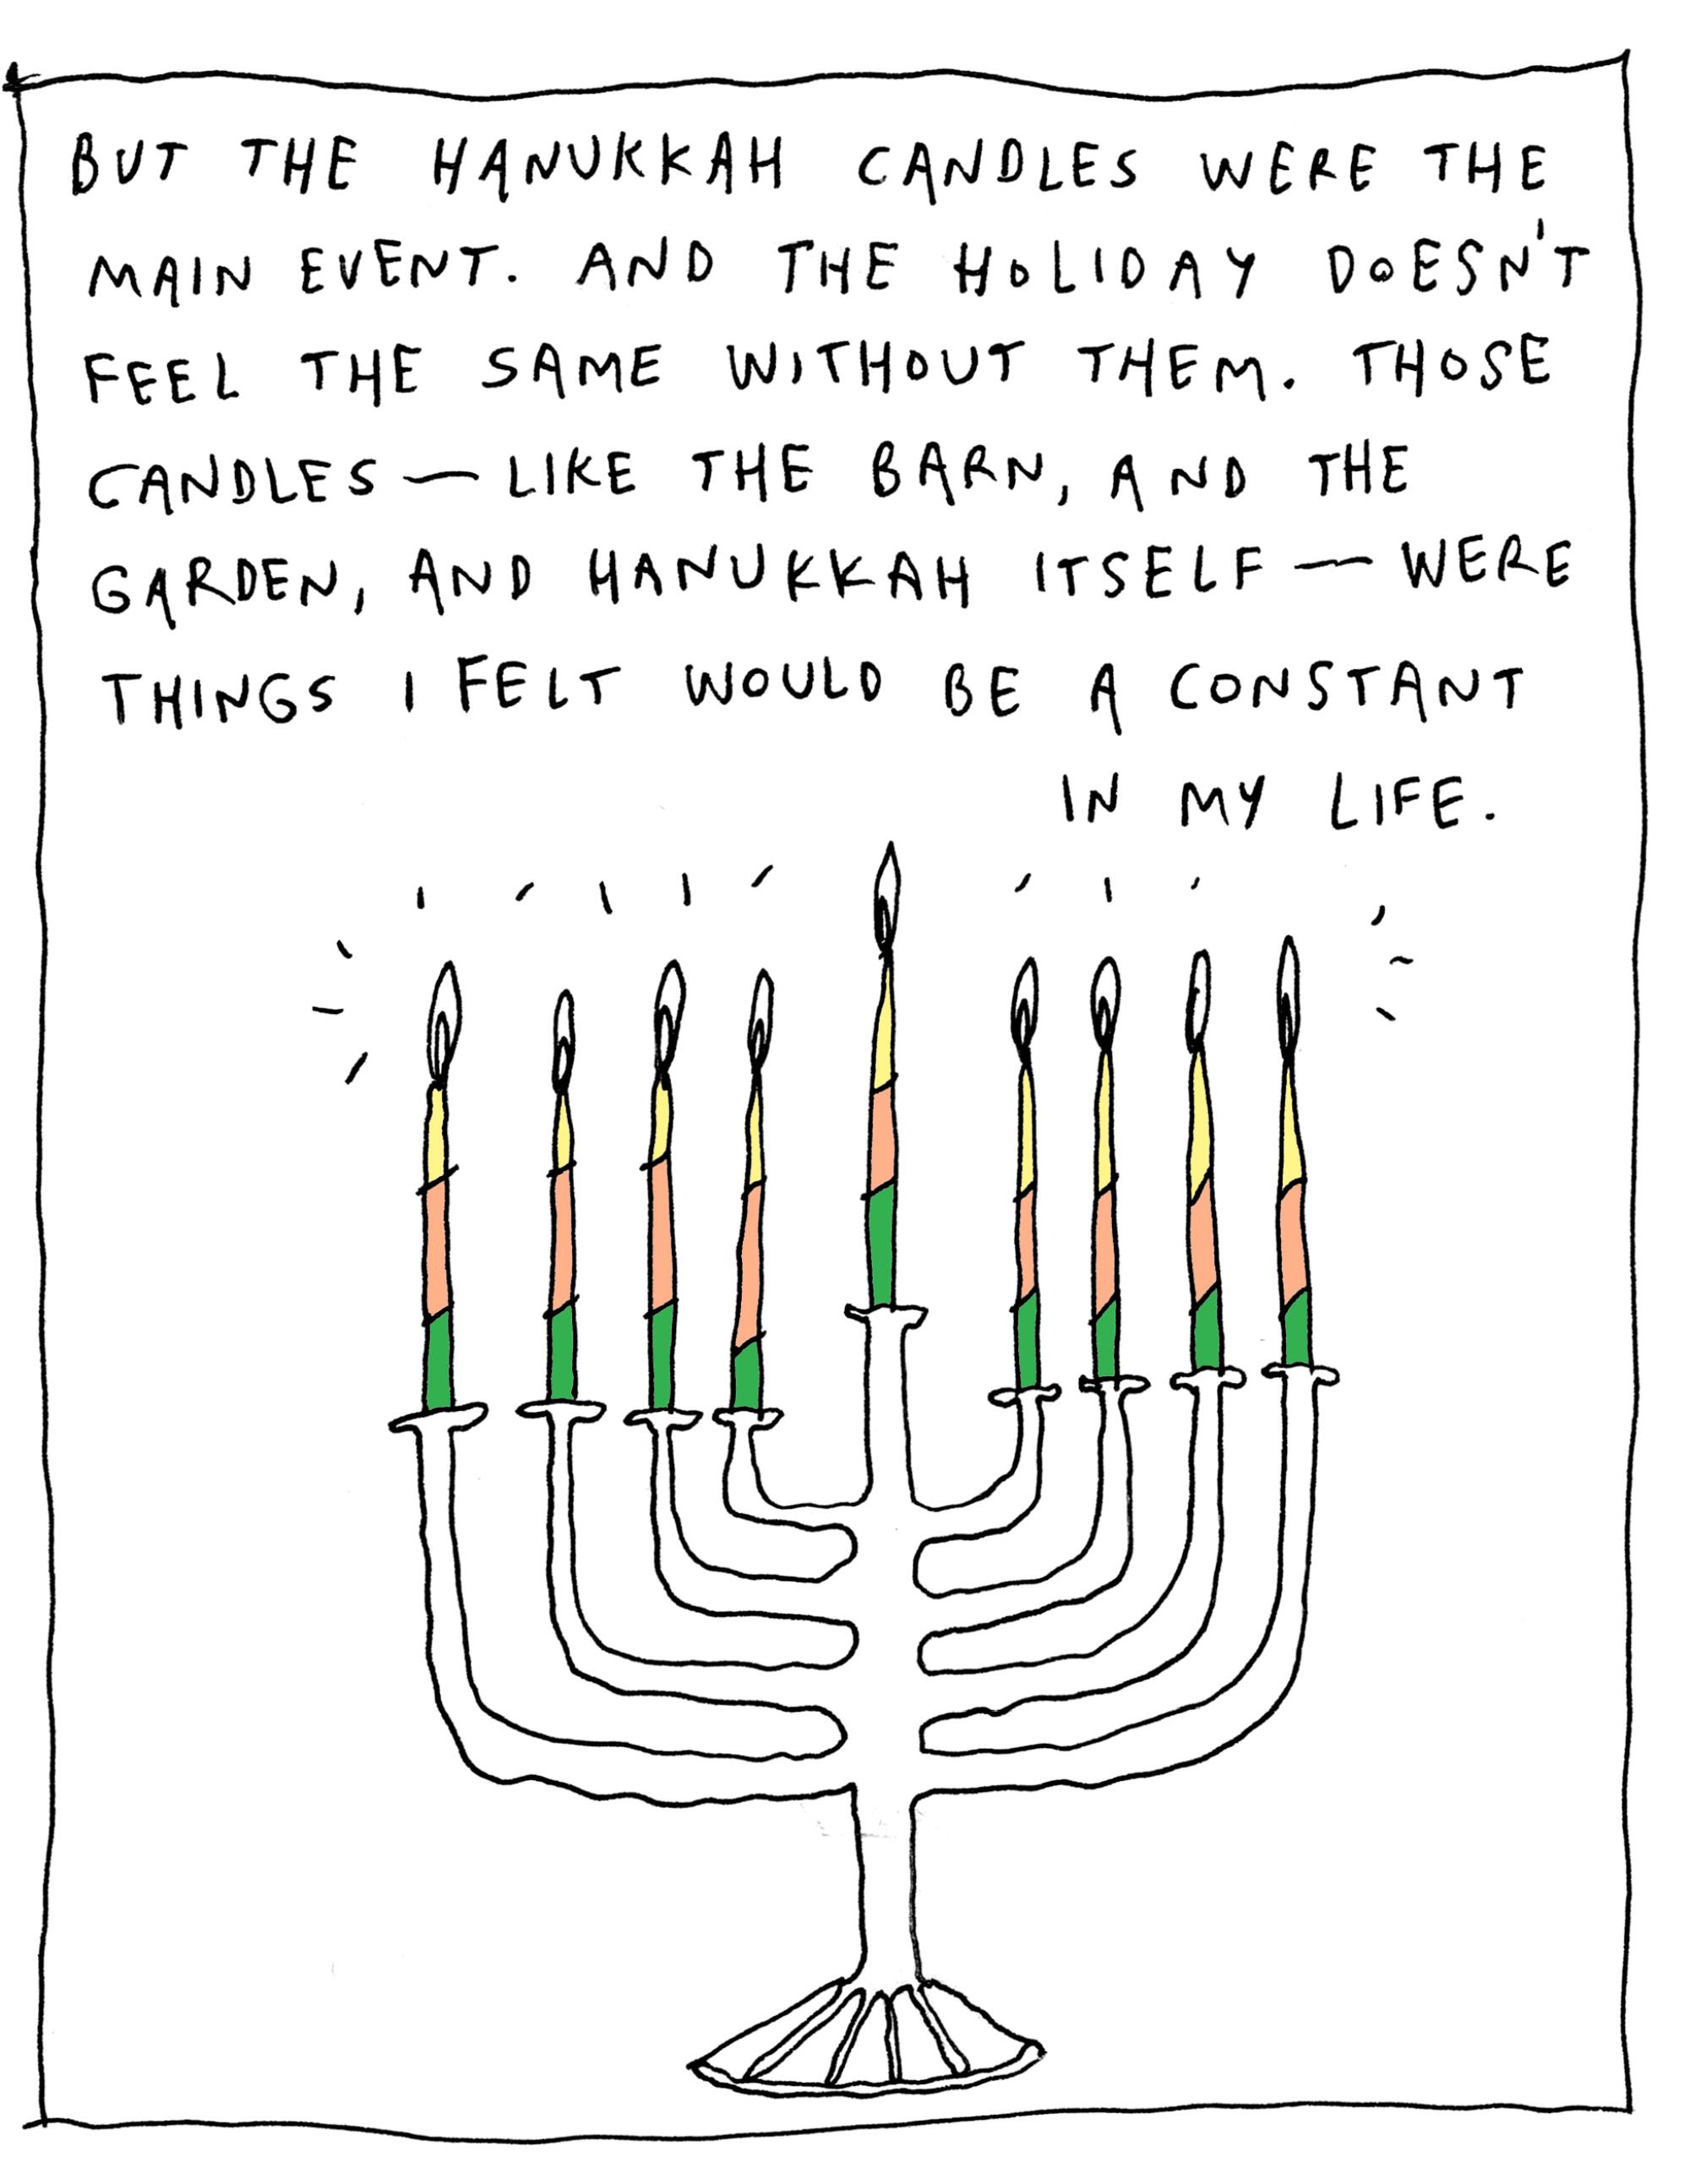 comic illustration of a menorah with 9 multicolored candles, all of them lit.